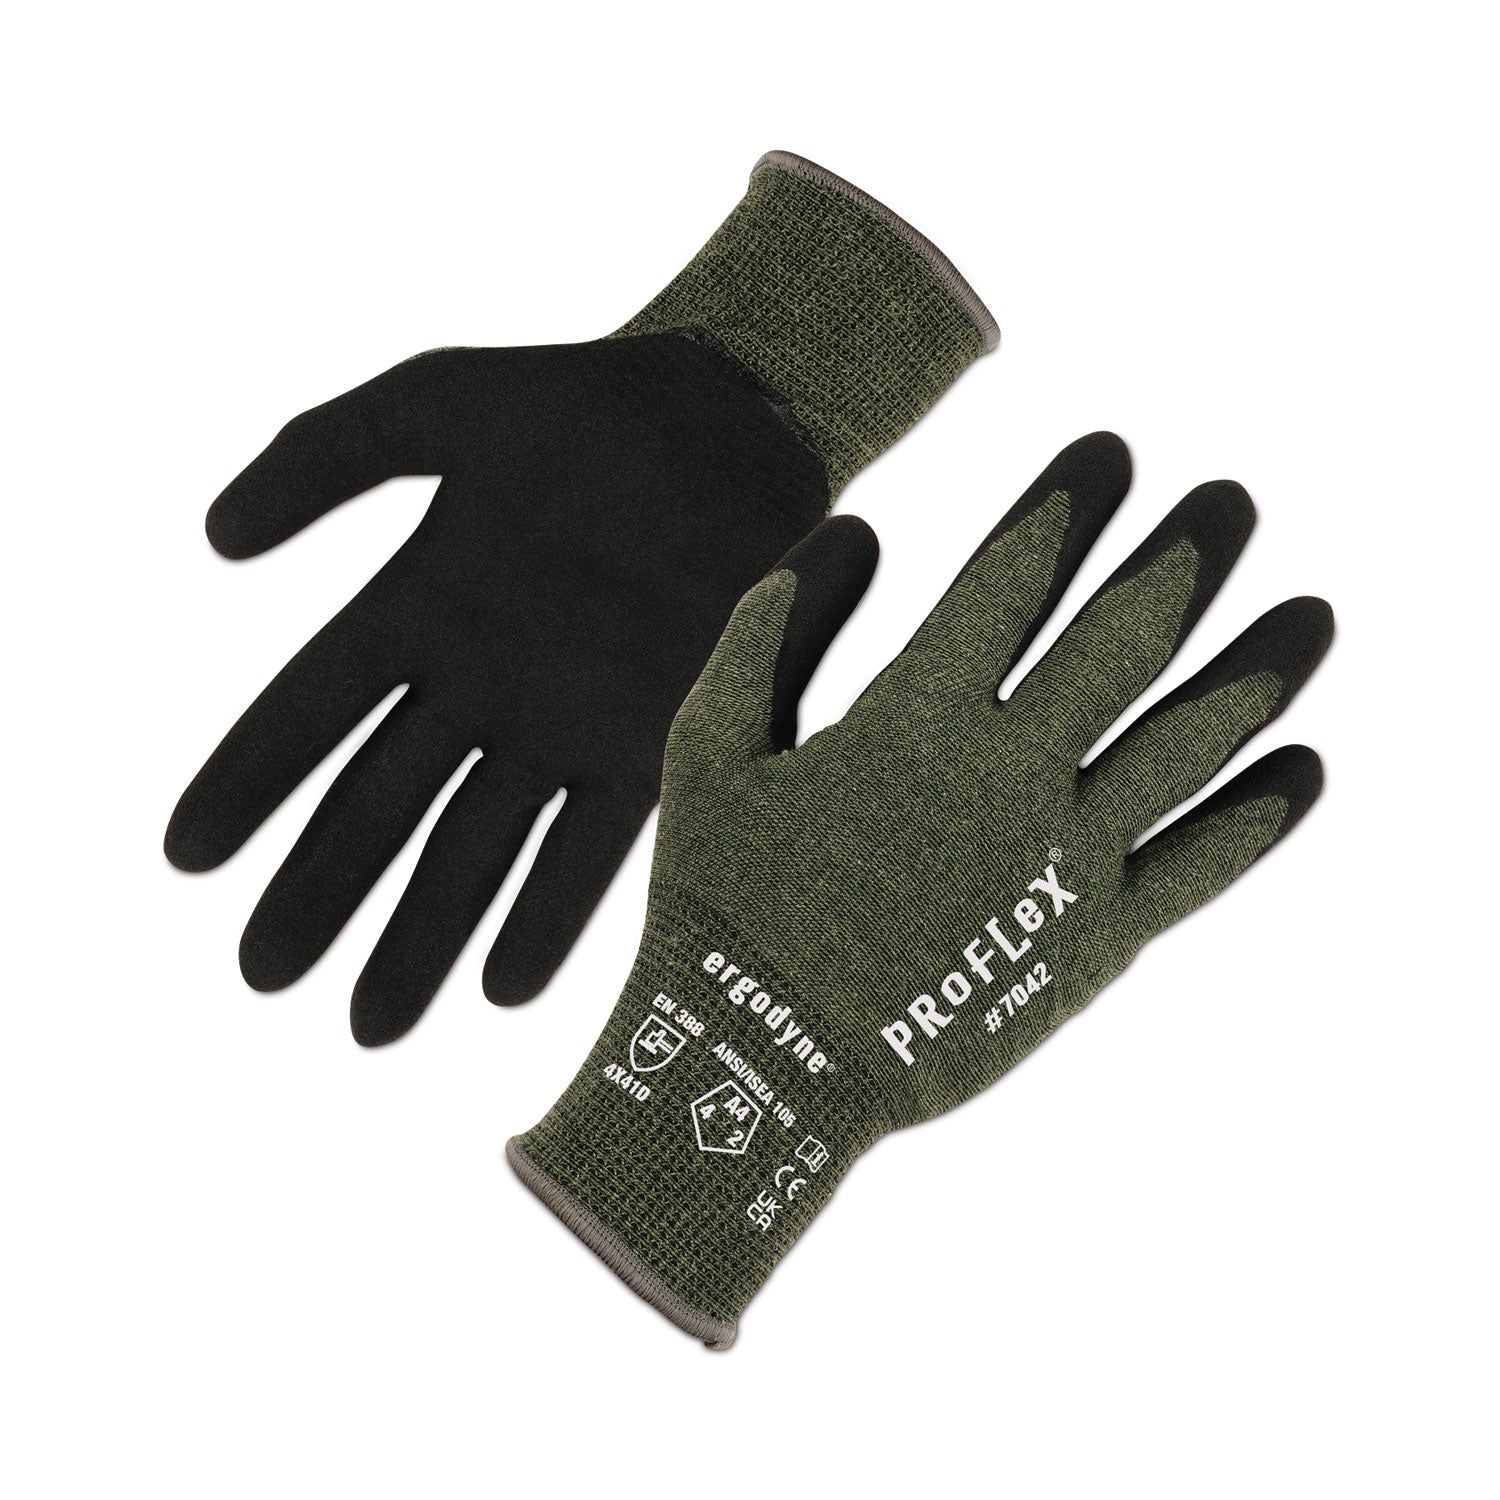 proflex-7042-ansi-a4-nitrile-coated-cr-gloves-green-2x-large-12-pairs-pack-ships-in-1-3-business-days_ego10336 - 1